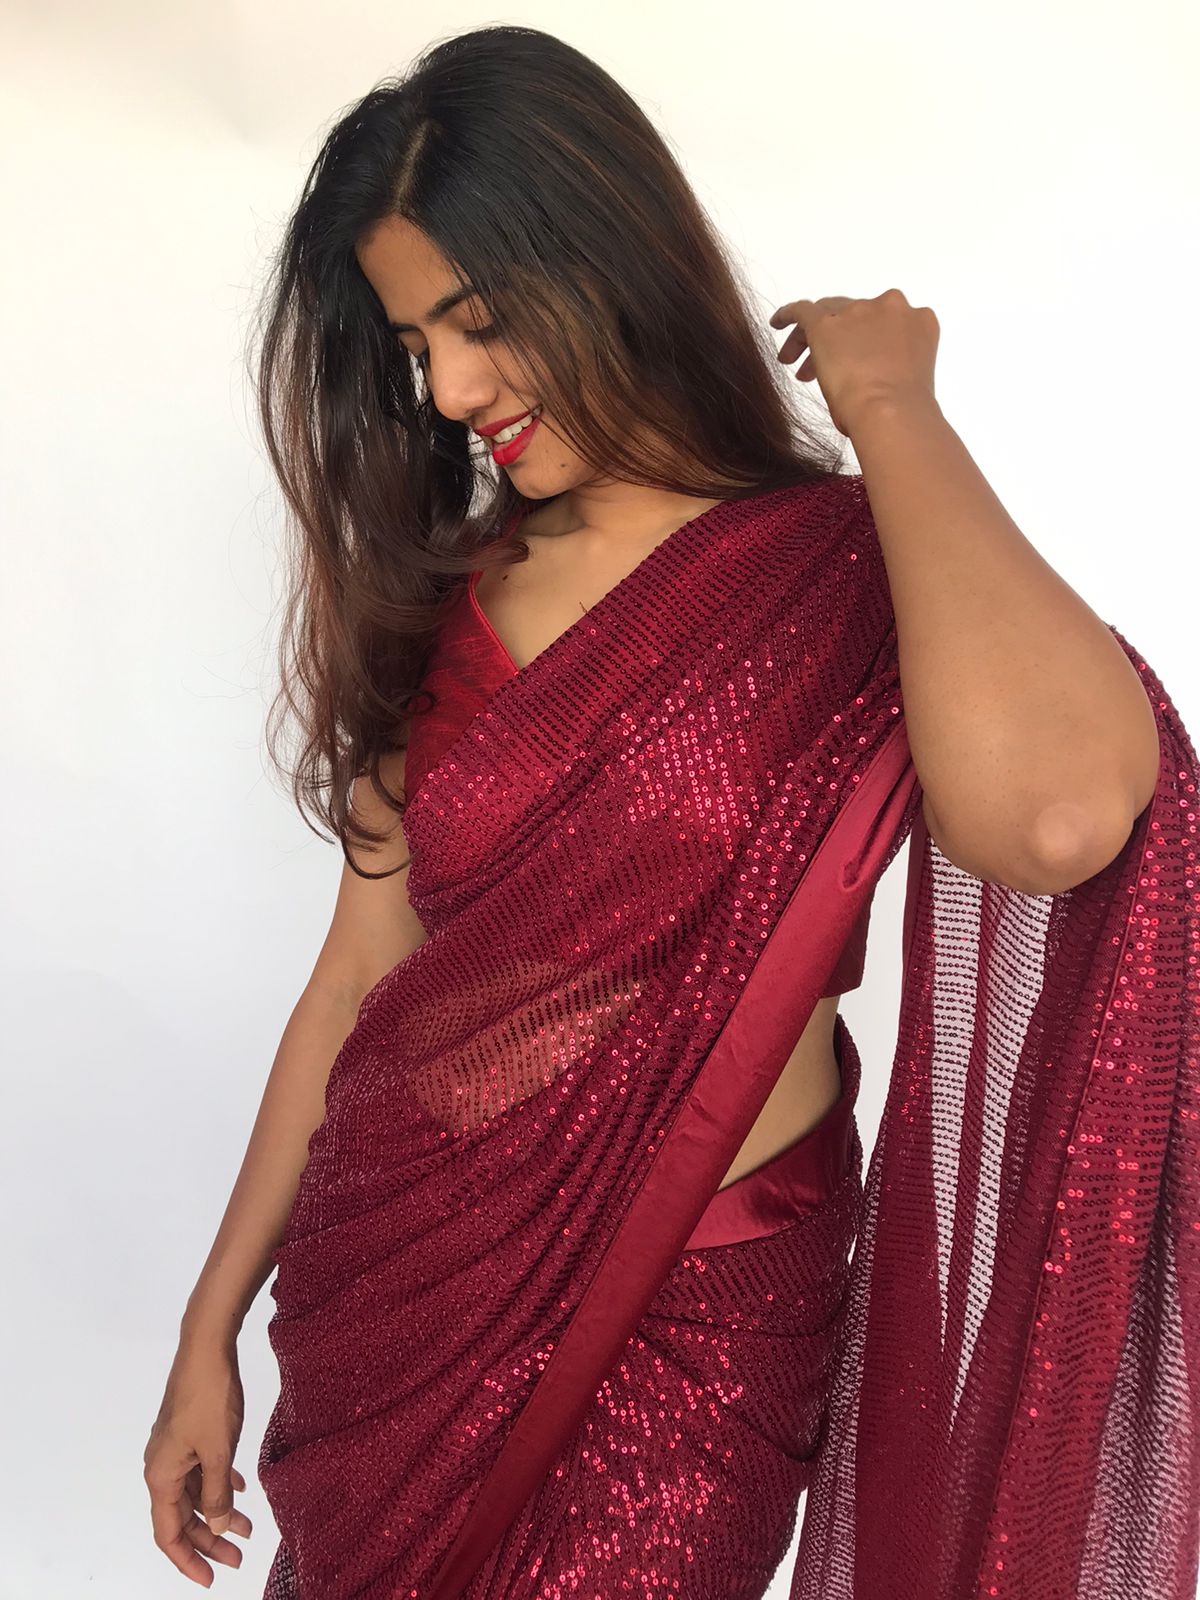 A to Z Saree Name List: Different types of sarees of different states